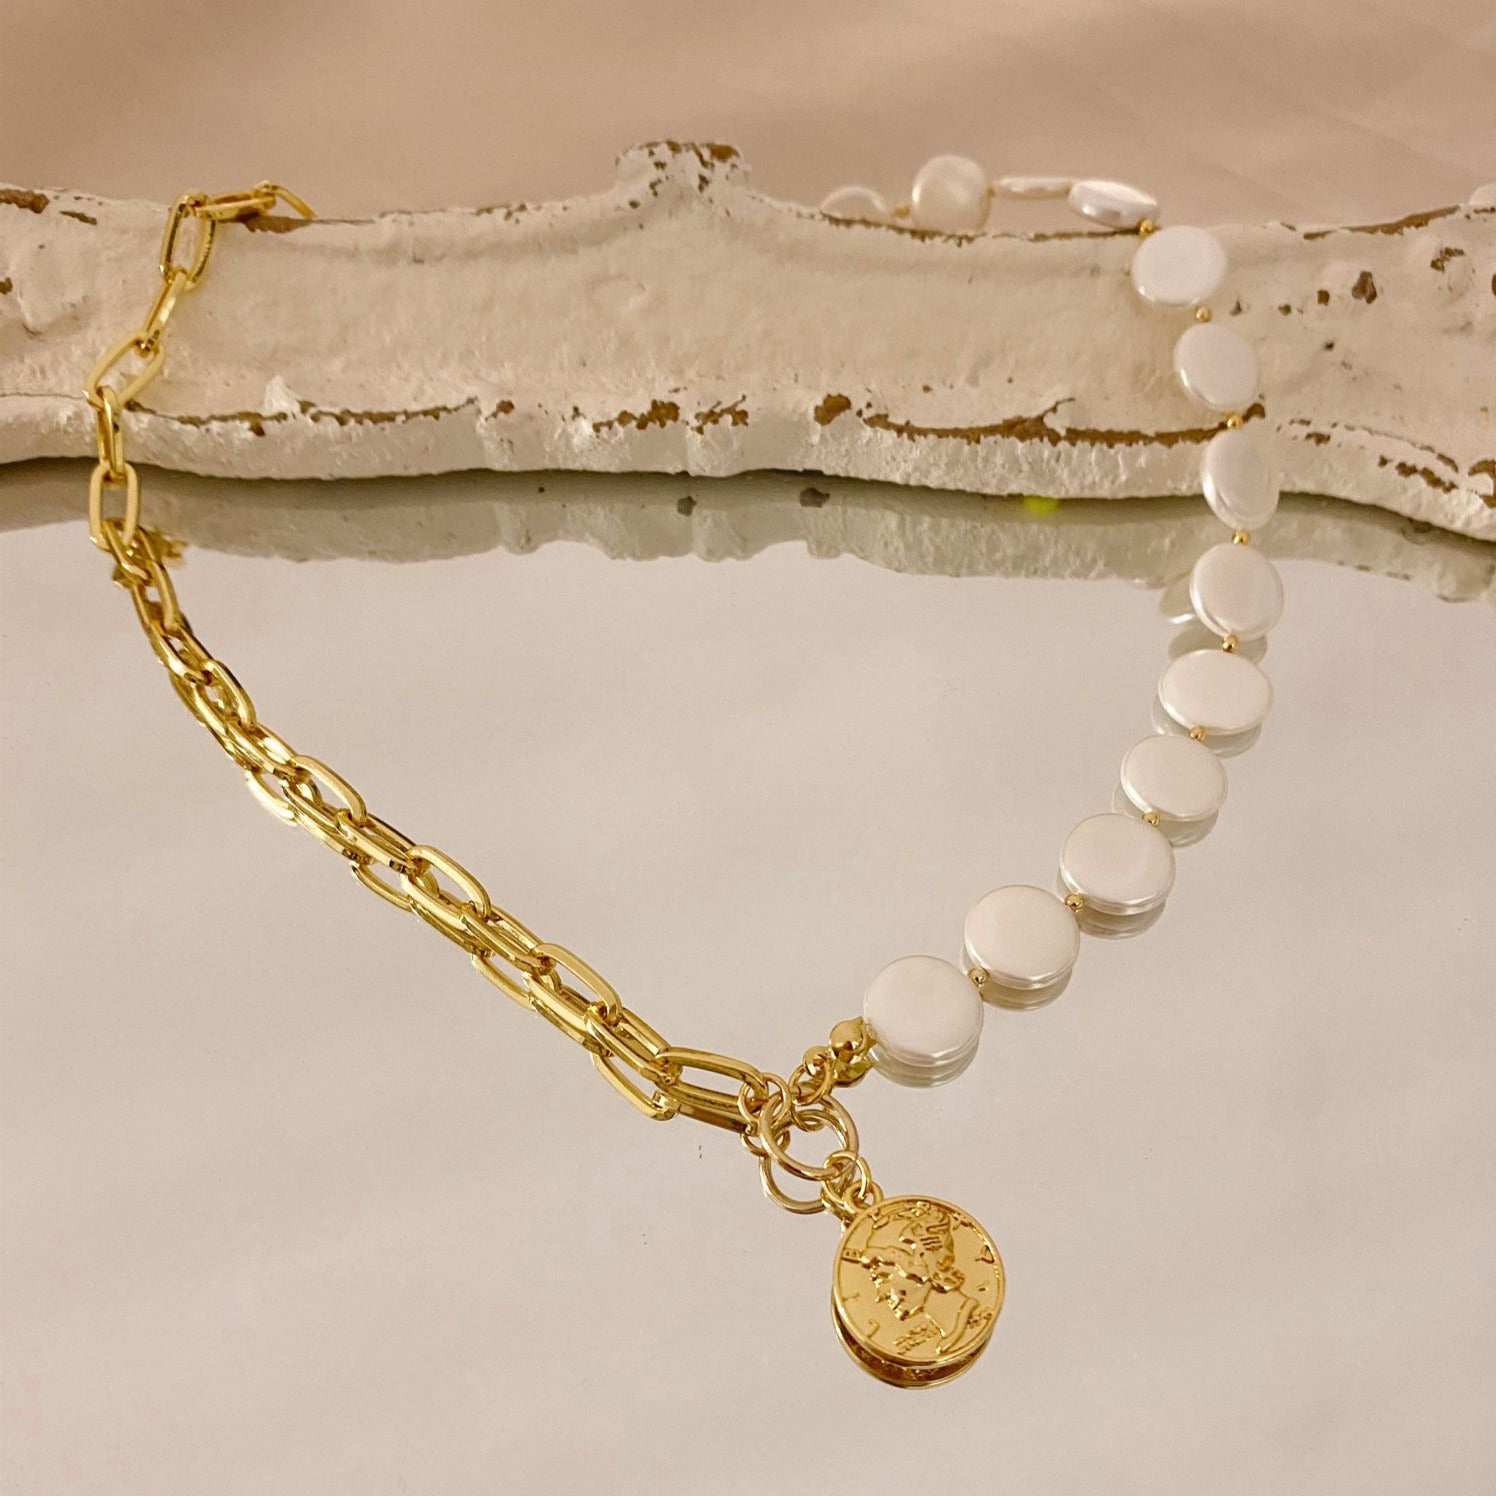 Gold Link Necklace with Half Pearls and Antique Medallion